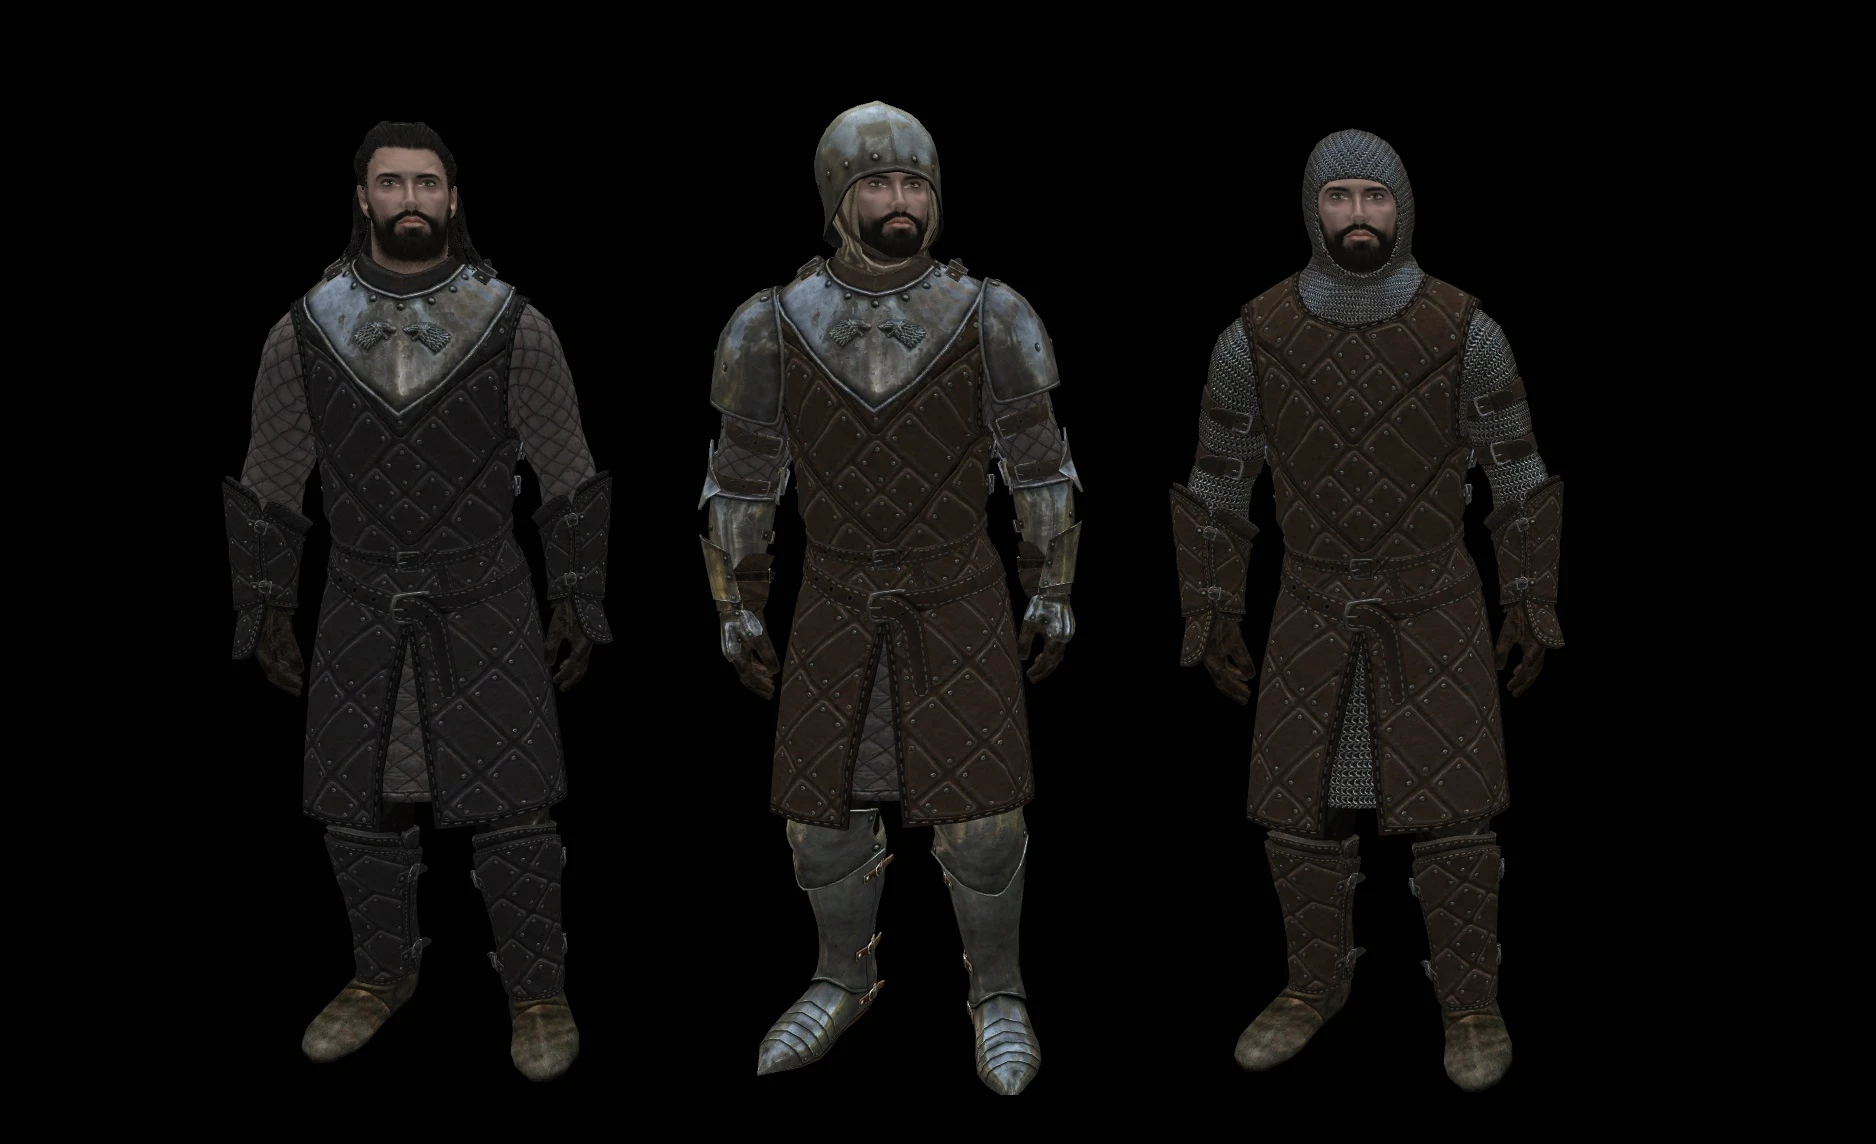 sithis armour special edition at skyrim special edition nexus mods.